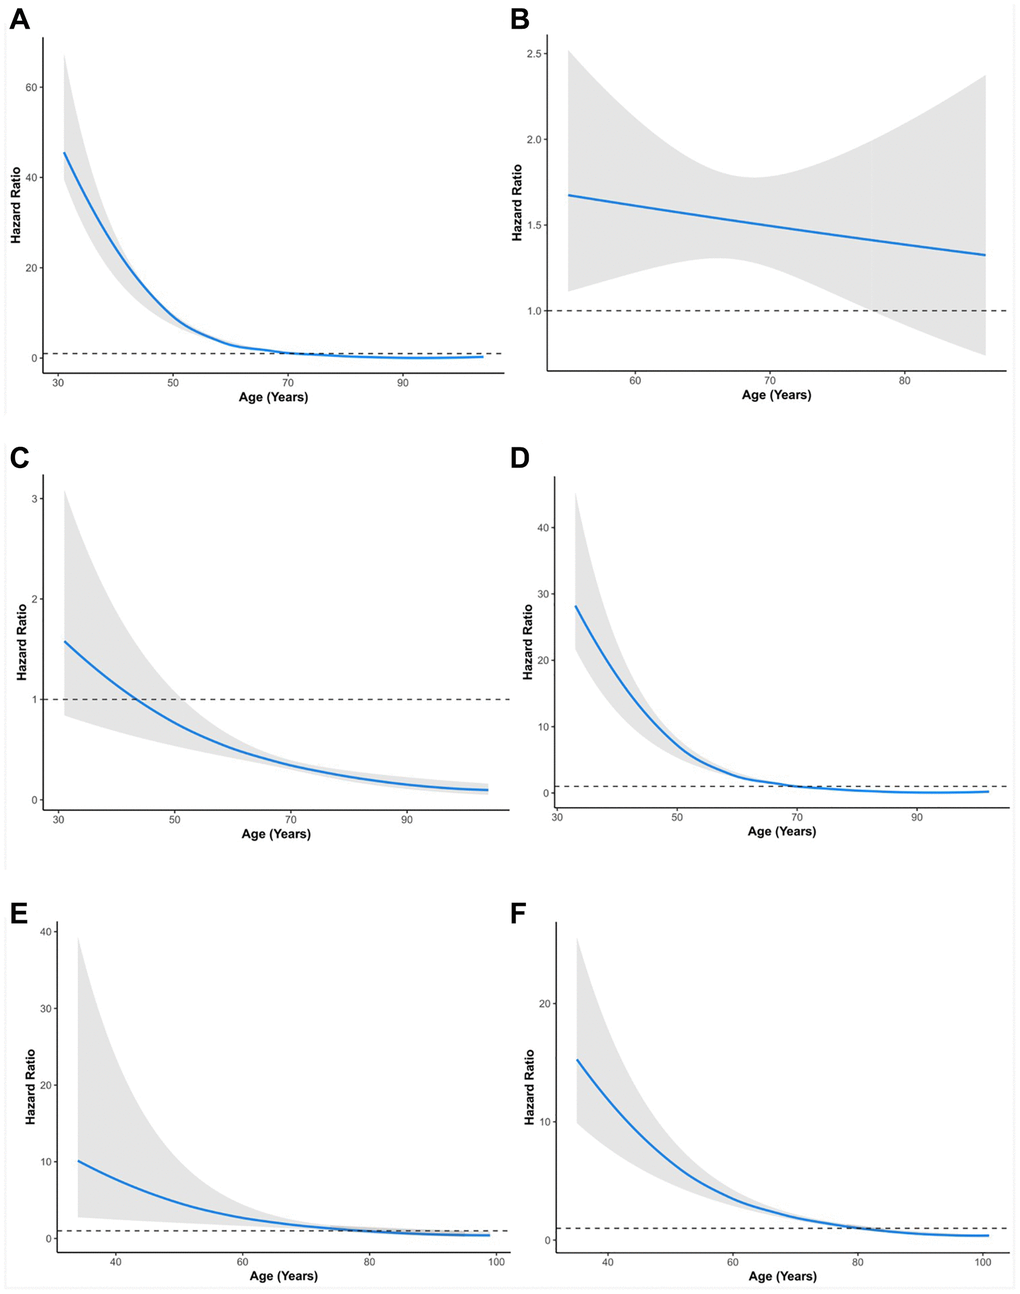 Relationship between age and hazard ratio of RT versus RP for patients with prostate cancer. (A) All groups in SEER. (B) All groups in PLCO. (C) Stage I group in SEER. (D) Stage II group in SEER. (E) Stage III group in SEER. (F) Stage IV group in SEER. SEER, Surveillance, Epidemiology, and End Results; PLCO, the Prostate, Lung, Colorectal, and Ovarian. The solid lines are multivariable adjusted hazard ratios. The shaded areas are the 95% confidence intervals. The dotted lines are coordinate 1 on the vertical axis.